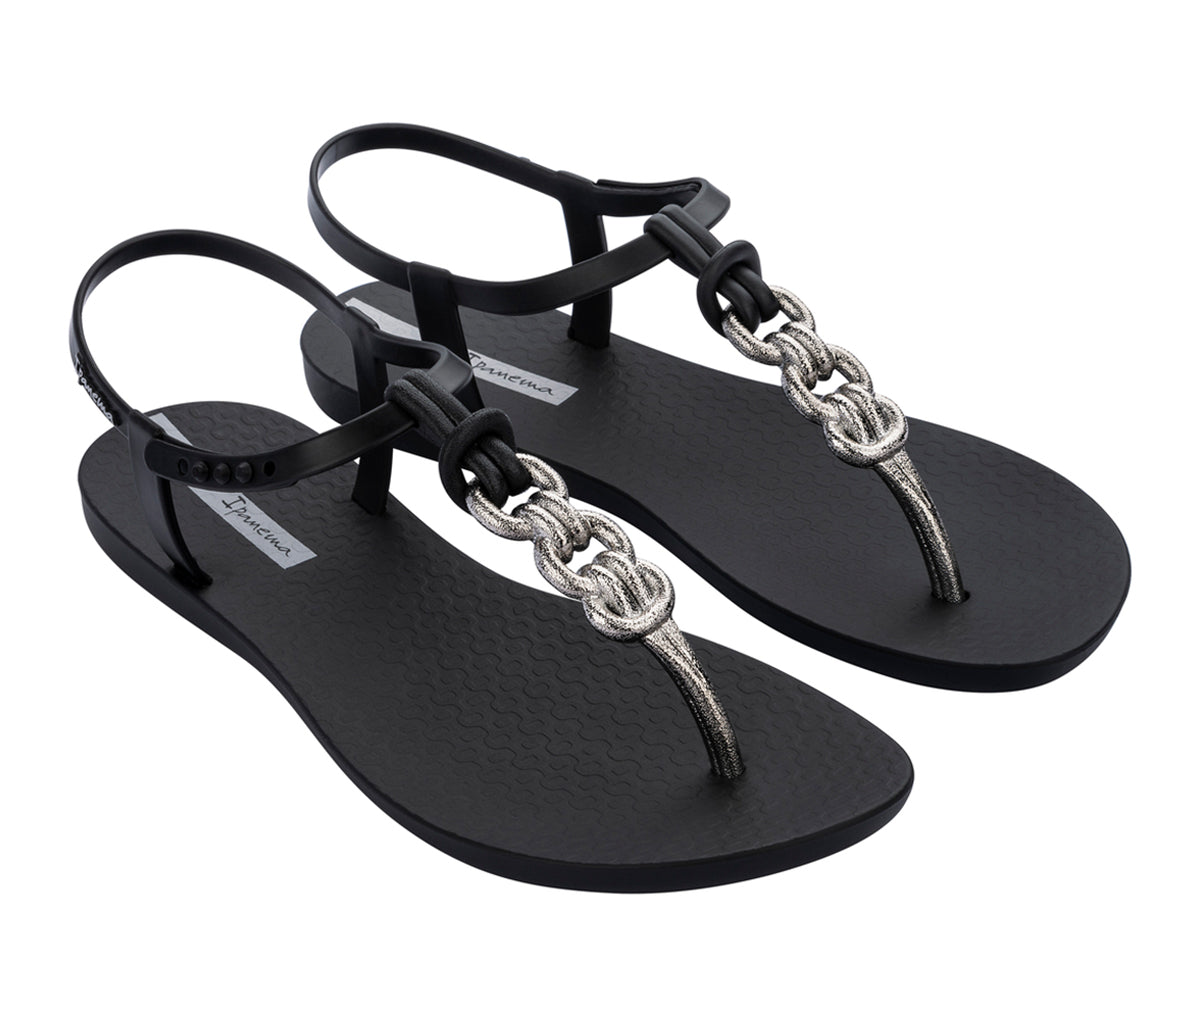 Angled view of a pair of black Ipanema Connect sandals with a silver chain-inspired T-strap.